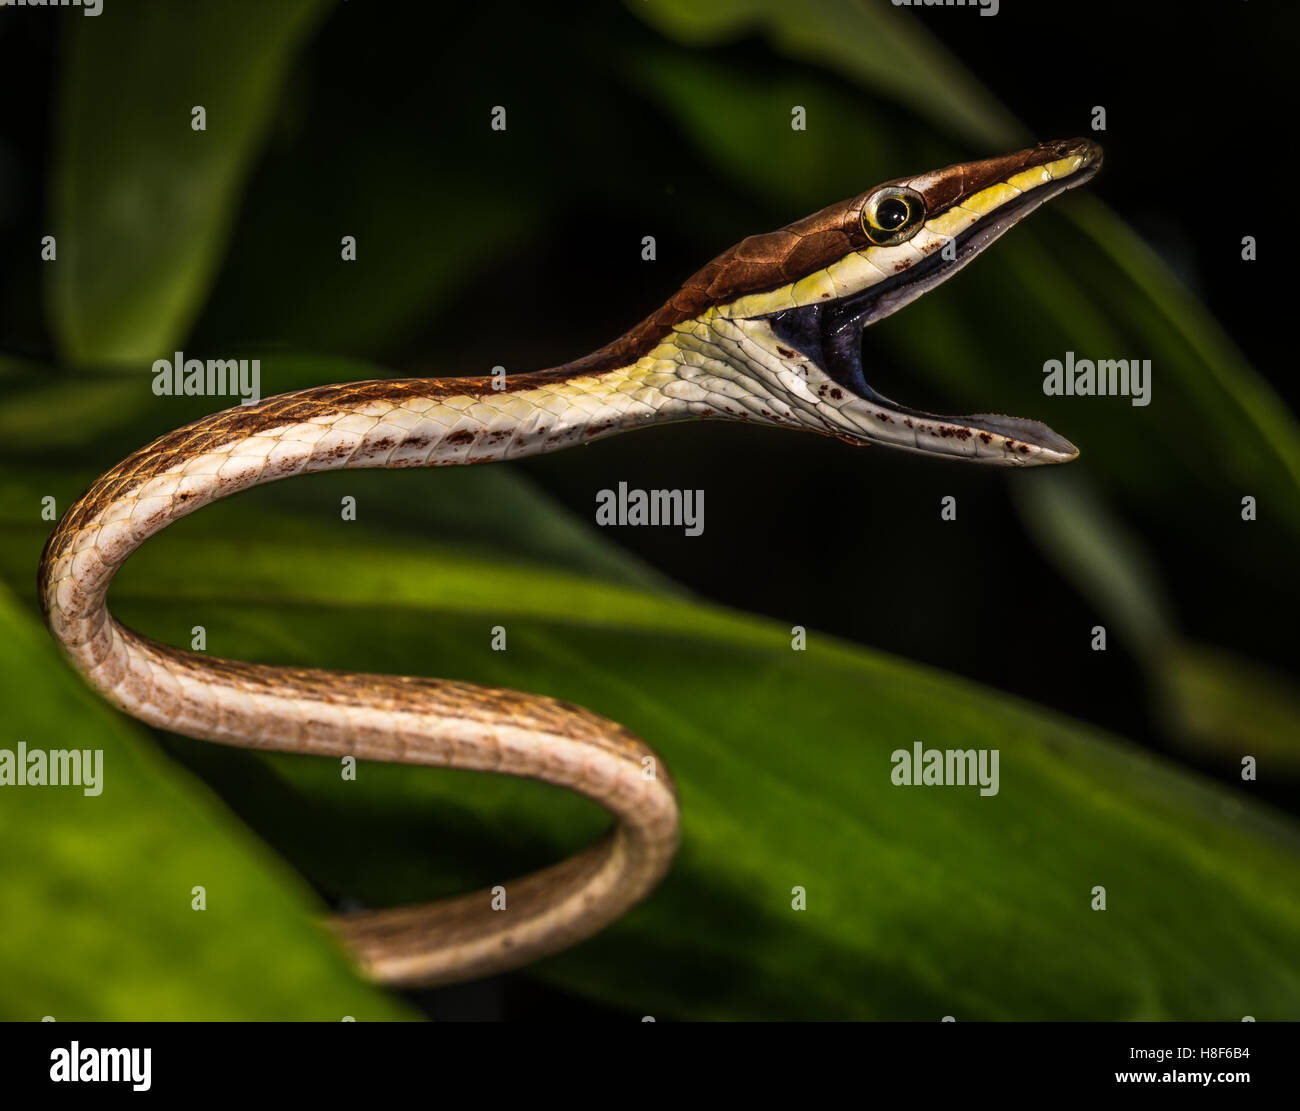 Oxybelis aeneus, commonly known as the Mexican vine snake or brown vine snake, is a species of colubrid snake Stock Photo